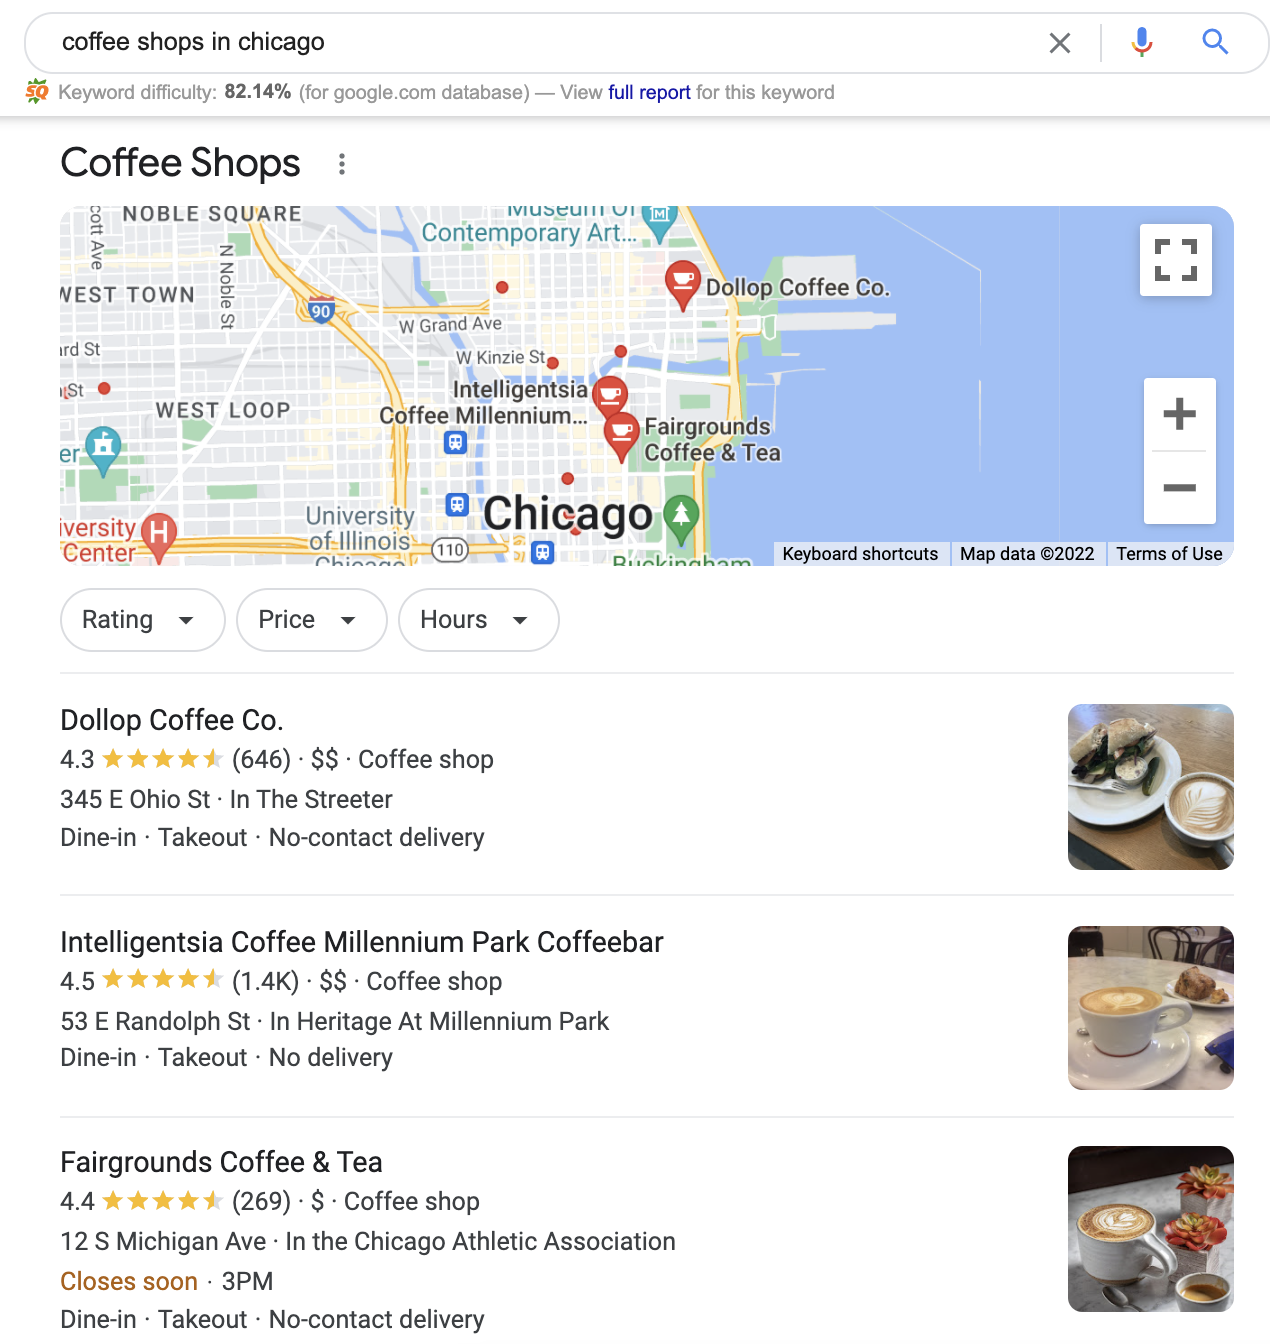 Coffee shops in Chicago